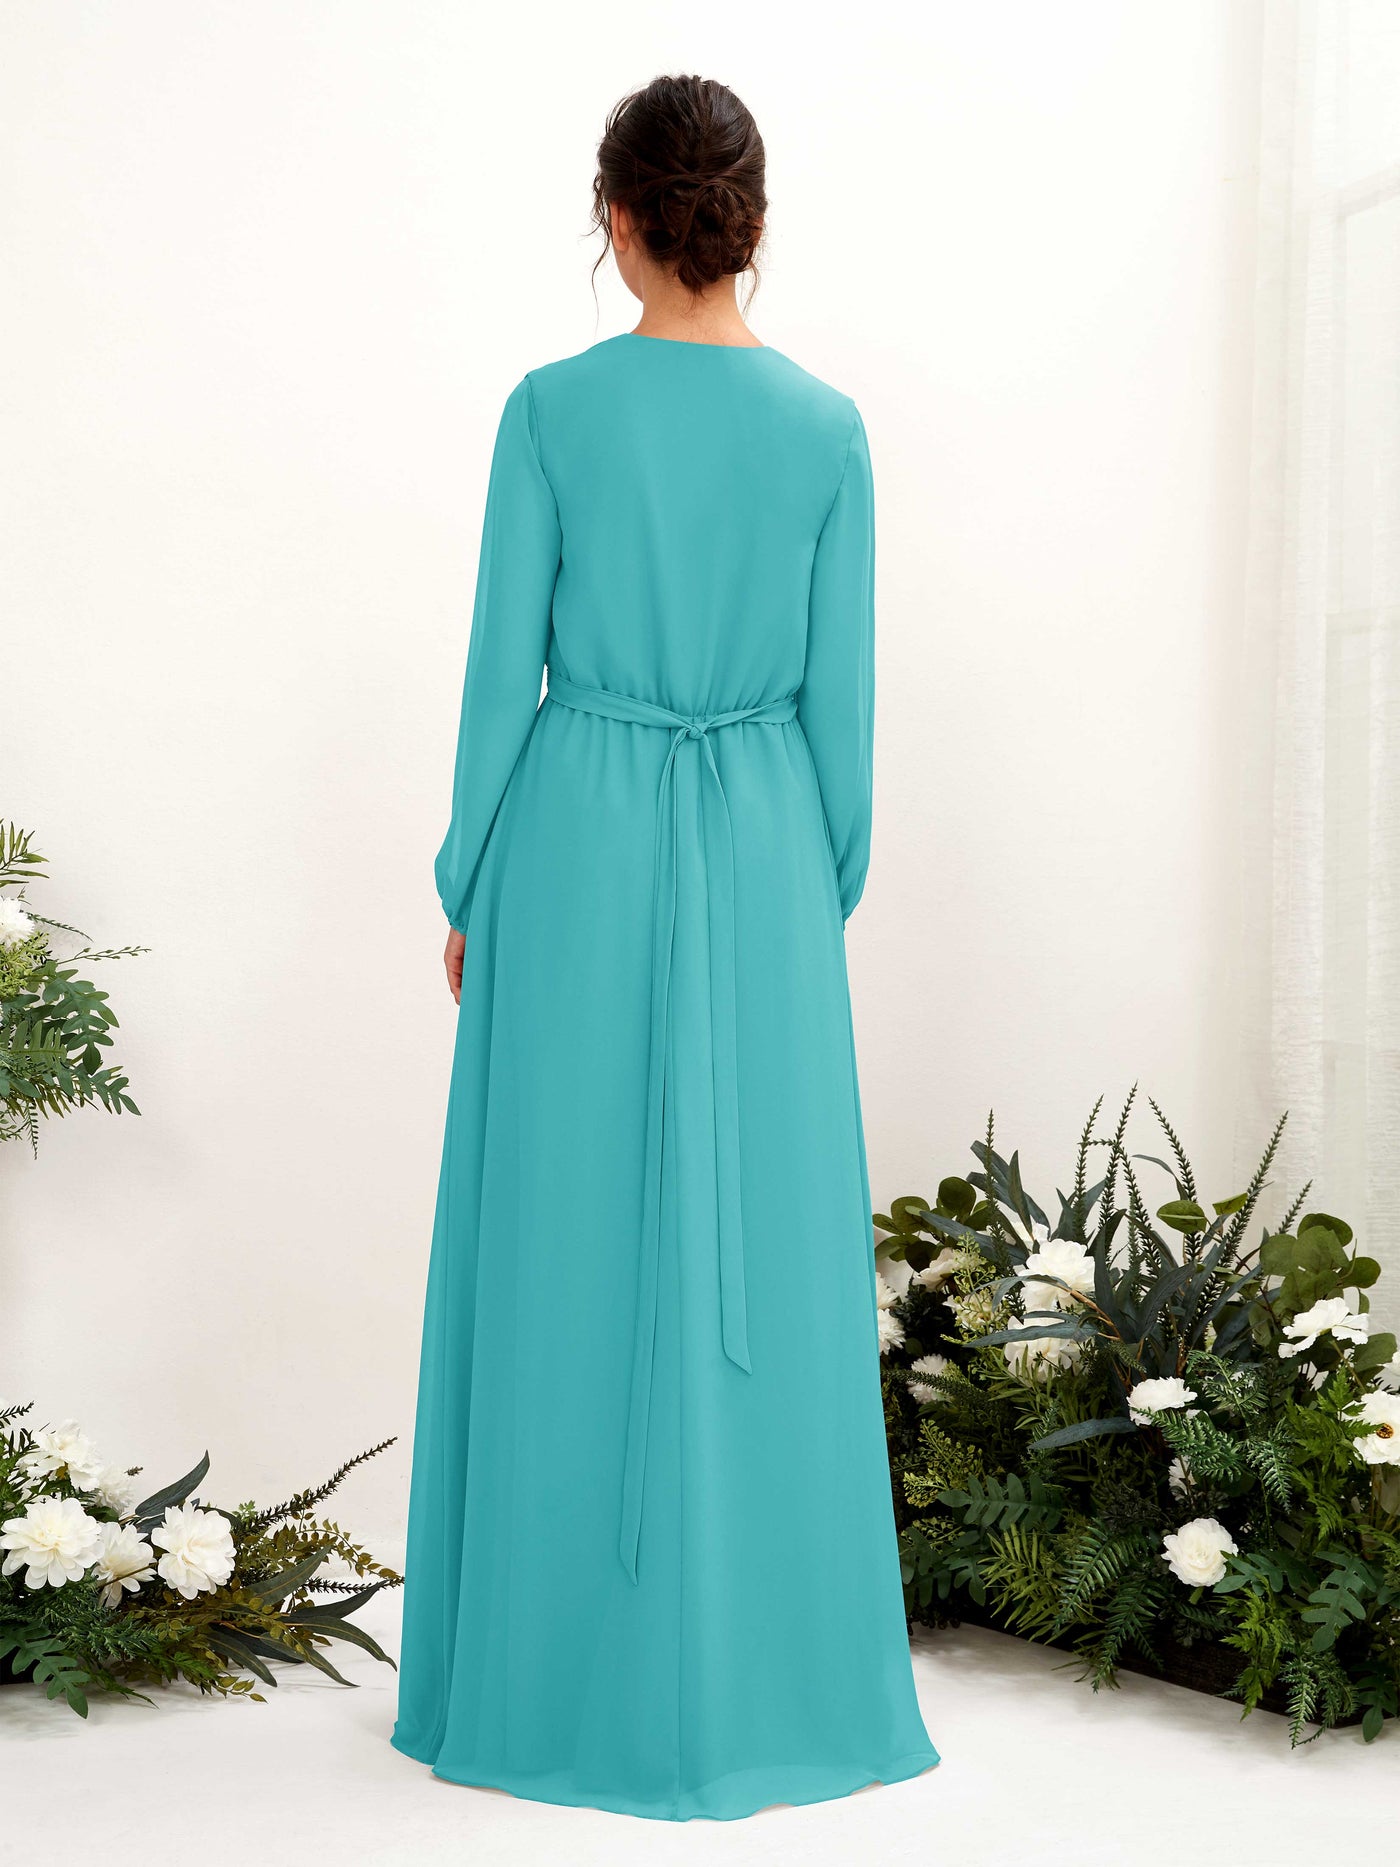 Turquoise Bridesmaid Dresses Bridesmaid Dress A-line Chiffon V-neck Full Length Long Sleeves Wedding Party Dress (81223223)#color_turquoise